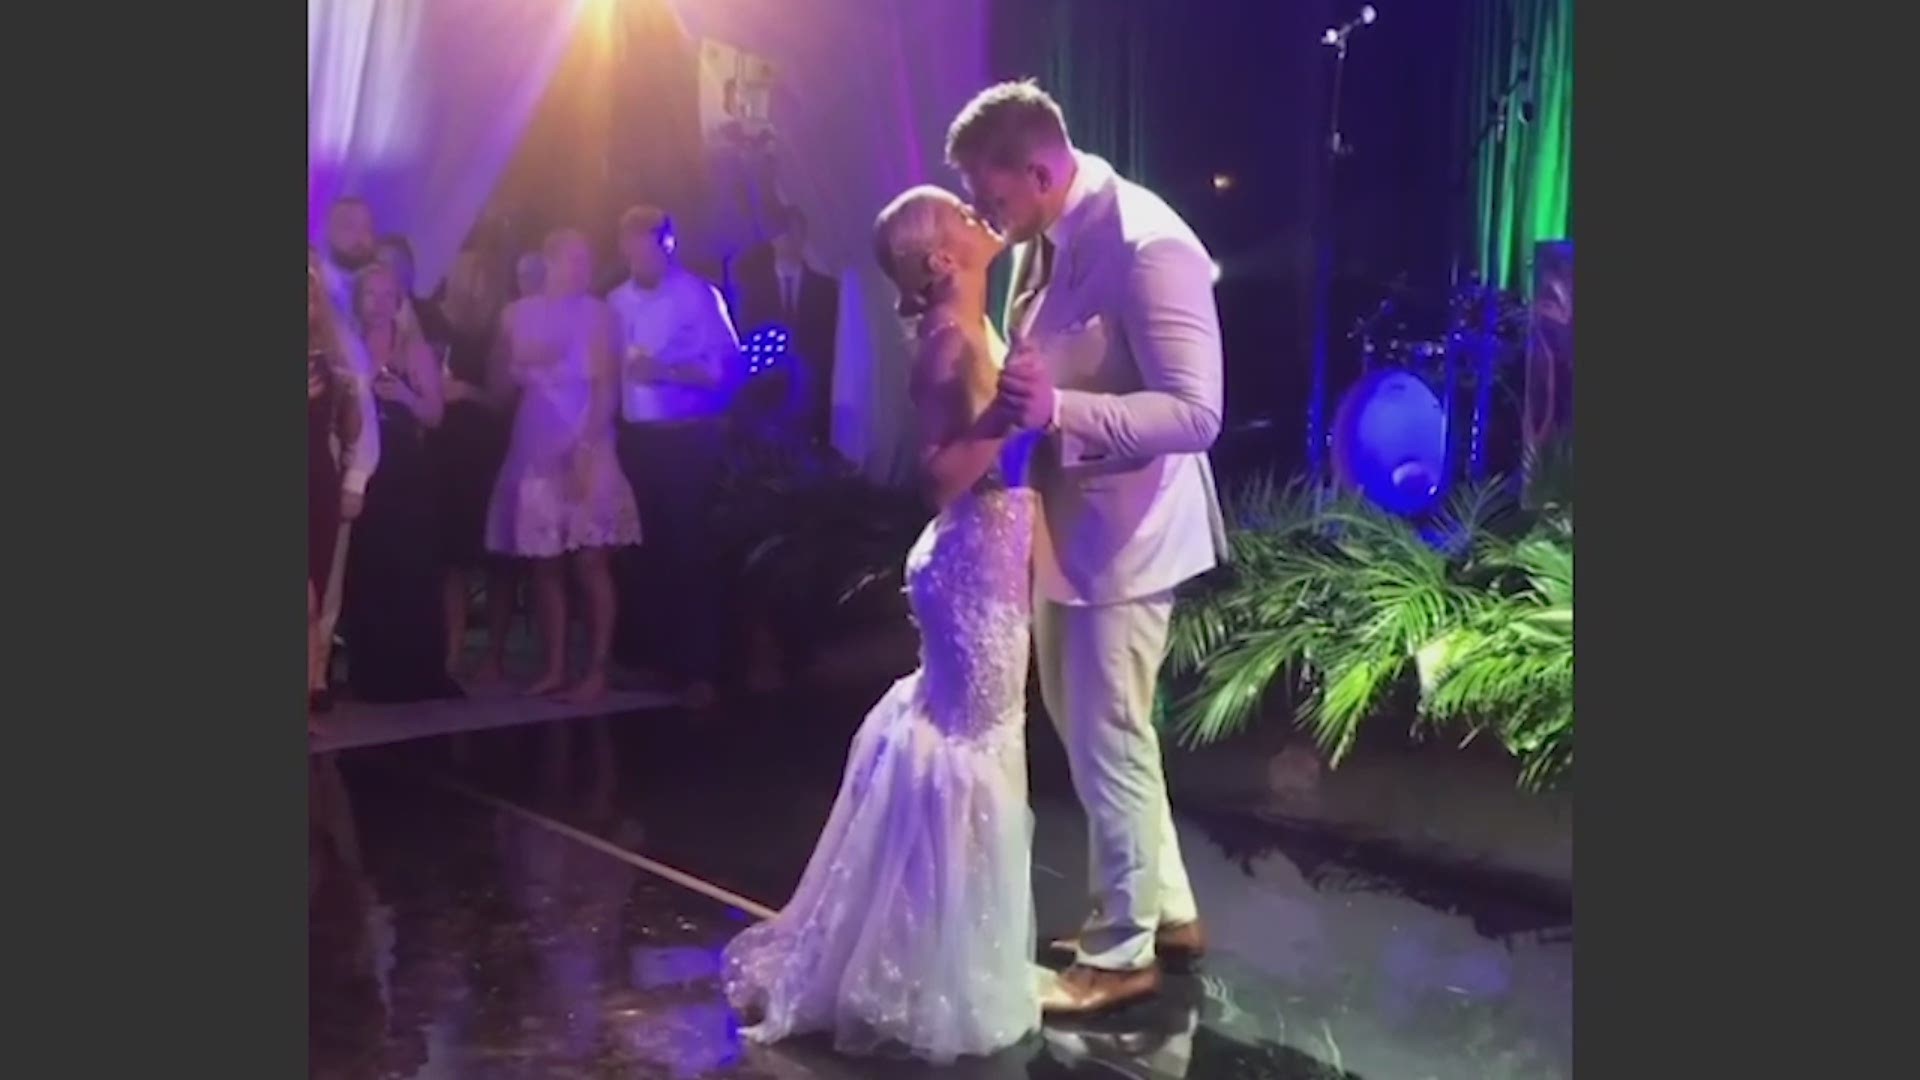 JJ Watt and Kealia Ohai are seen dancing at their wedding in the Bahamas on Feb. 15, 2020. The video was recorded by Amber Brooks.